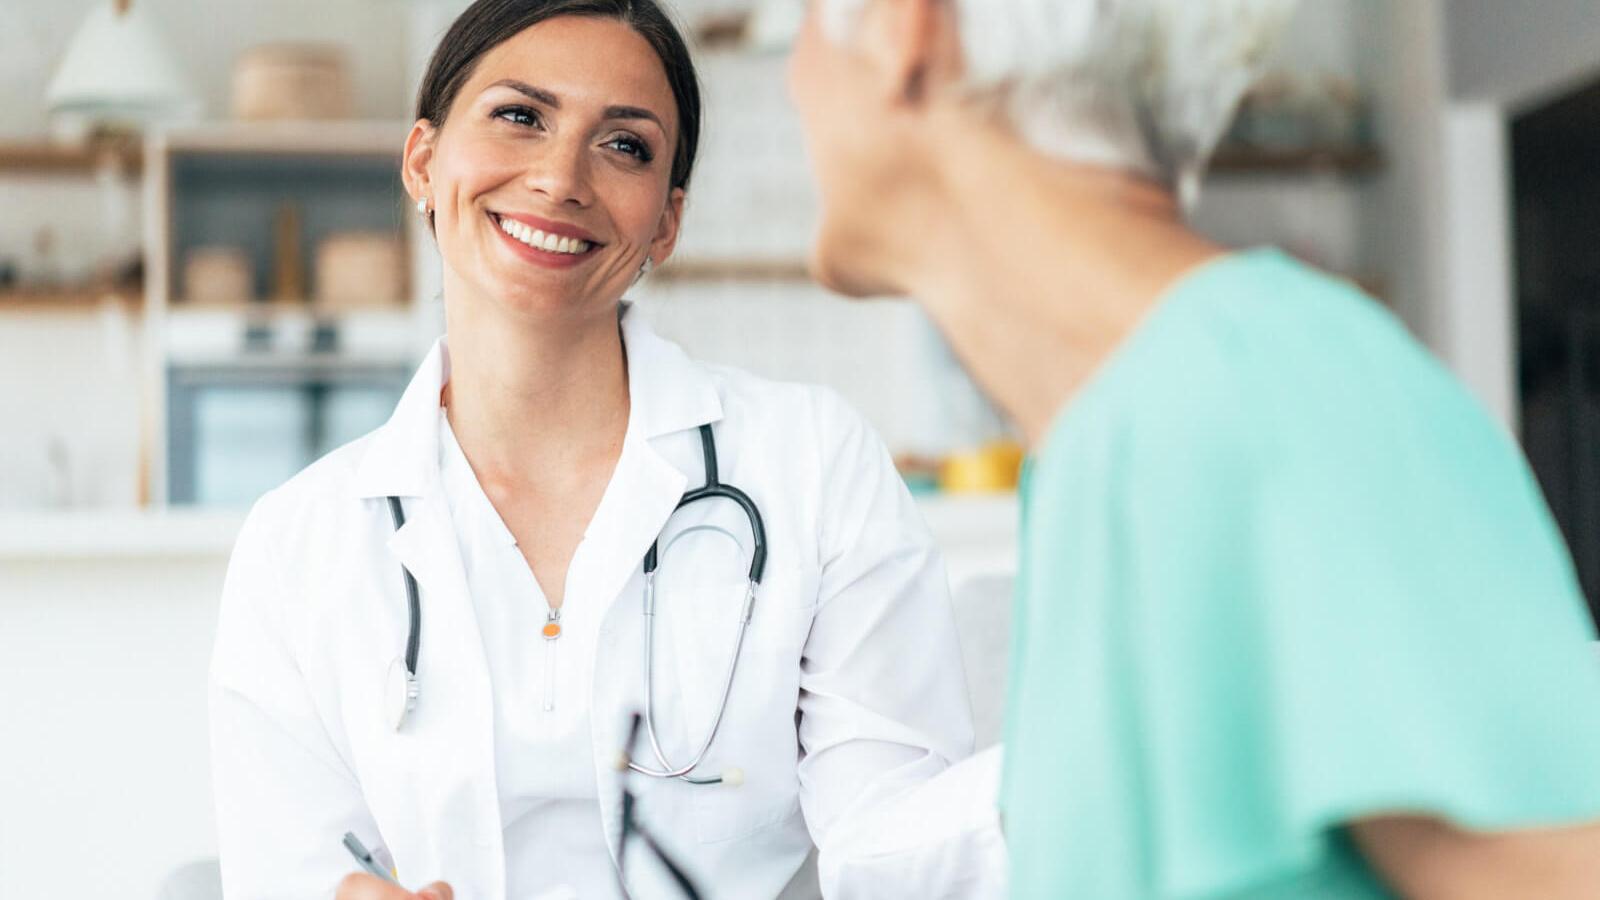 Smiling female doctor talks with patient.